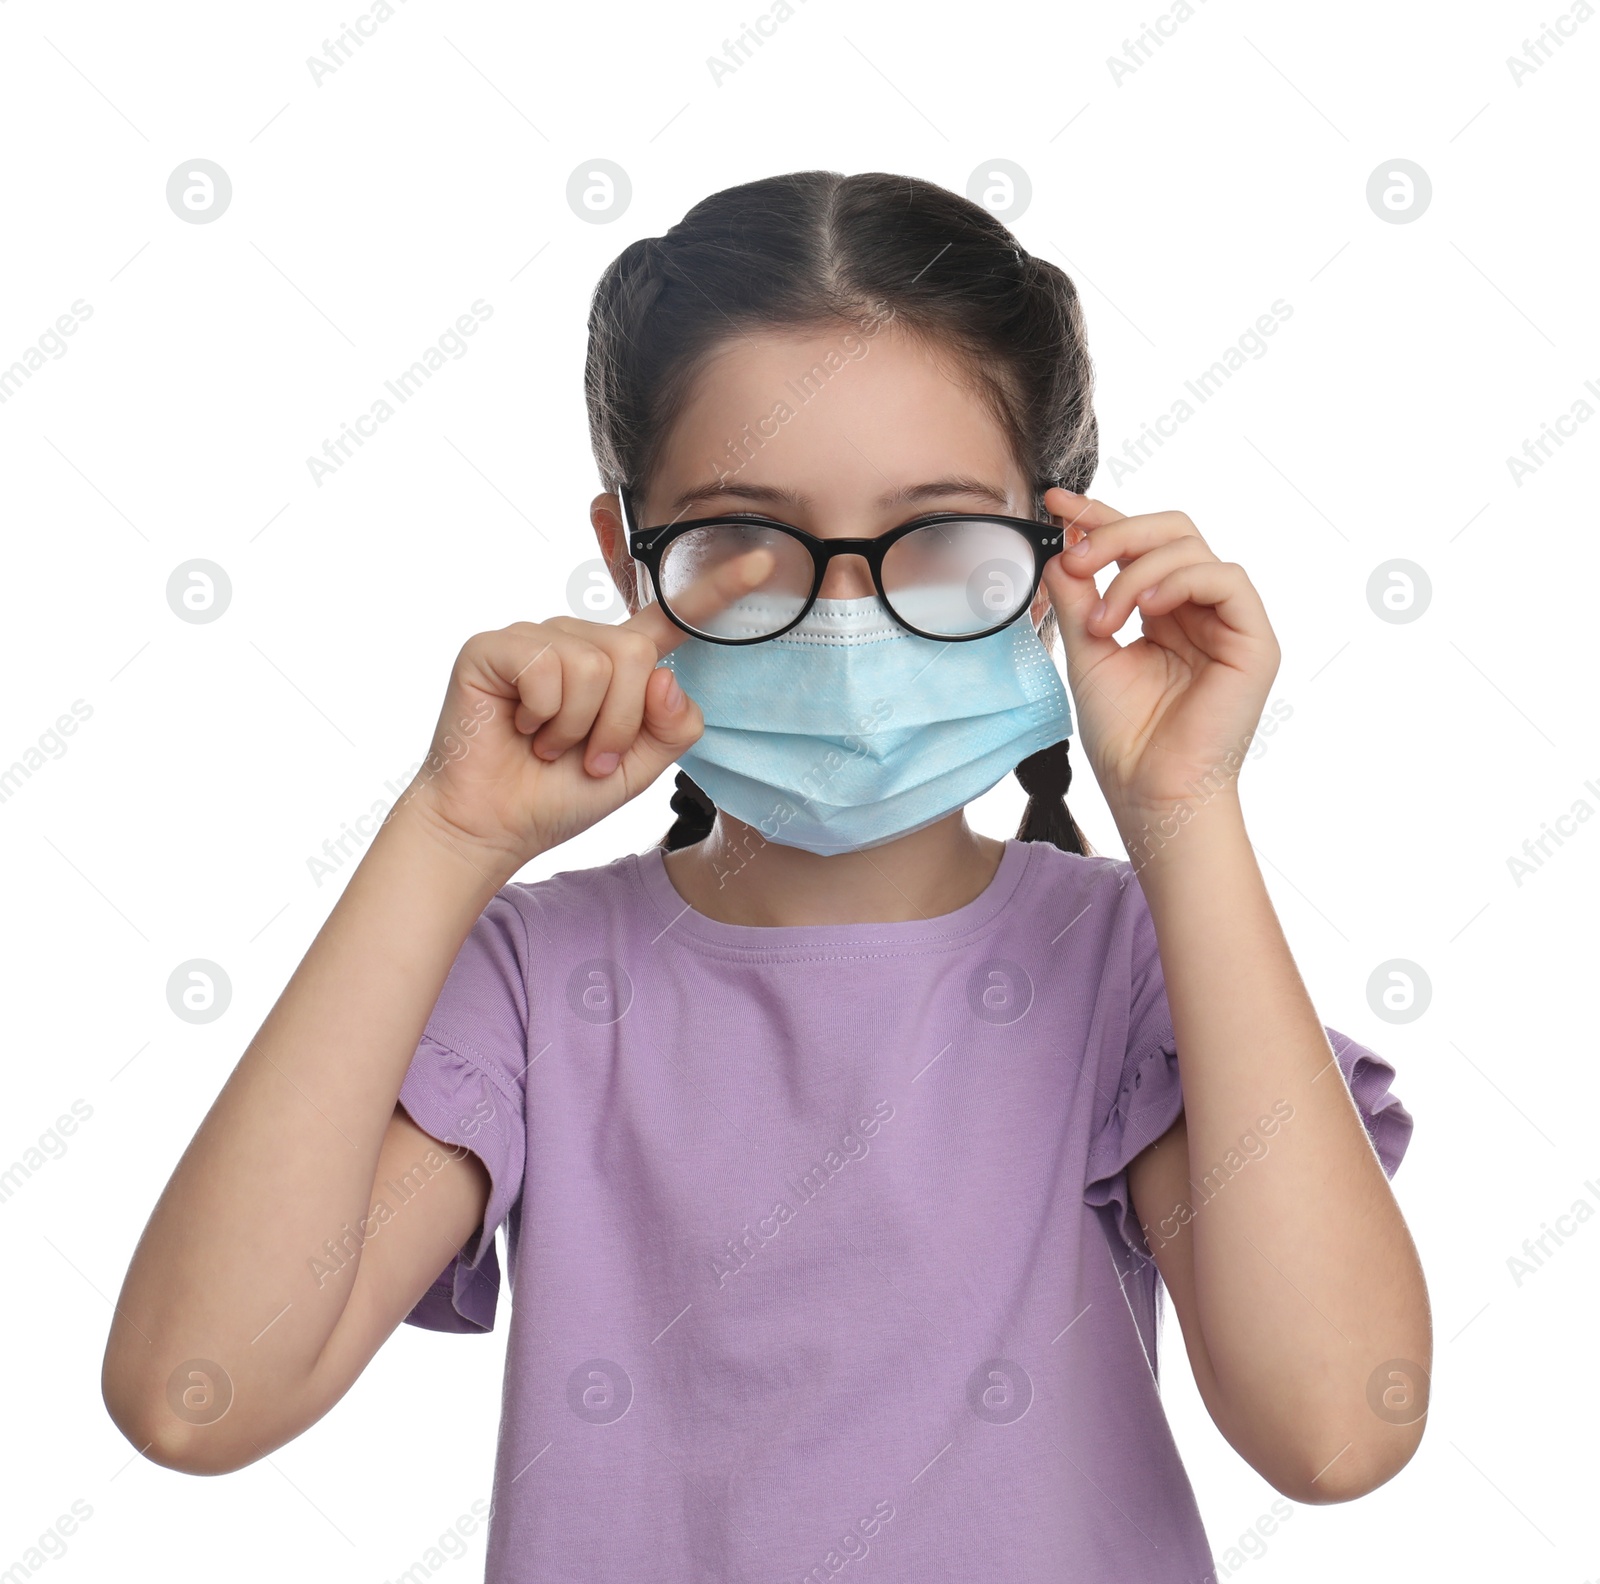 Photo of Little girl wiping foggy glasses caused by wearing medical face mask on white background. Protective measure during coronavirus pandemic